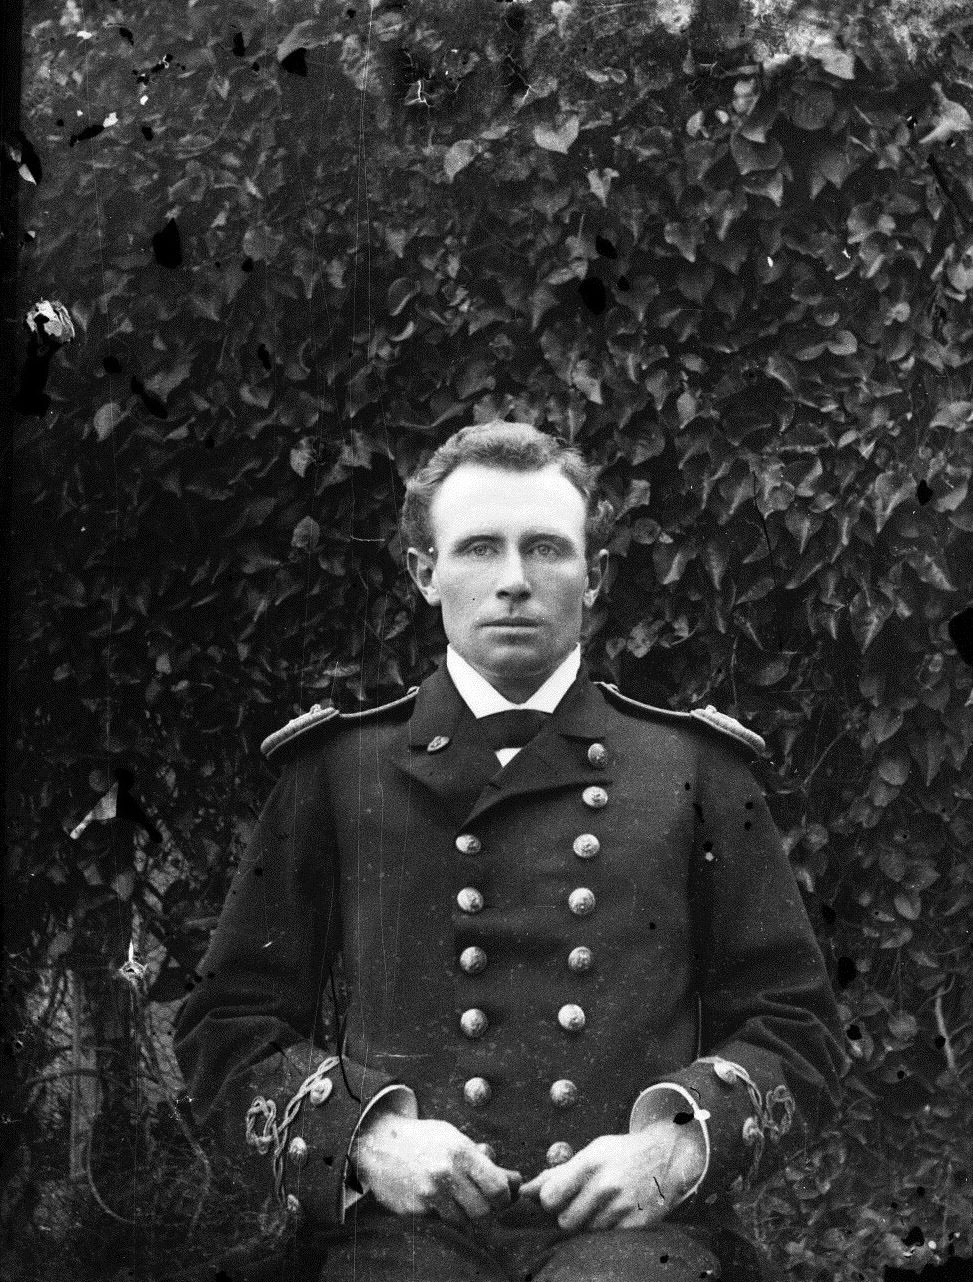 Portrait of a naval officer, about 1900